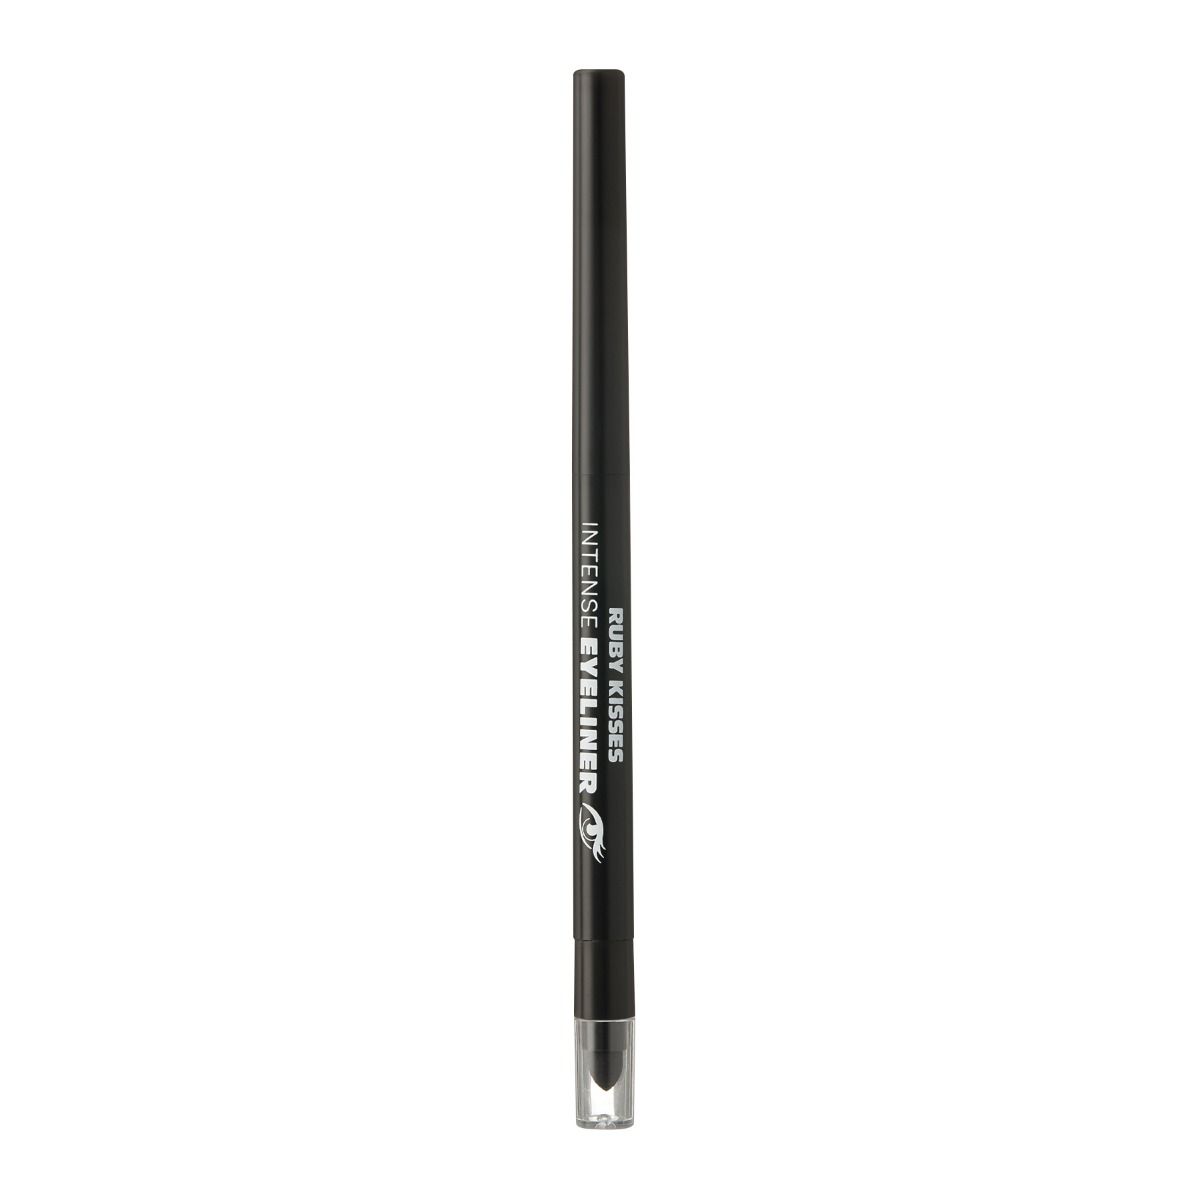 Ruby by Kiss Perfect Precision Auto Eyeliner Pencil with Smudger